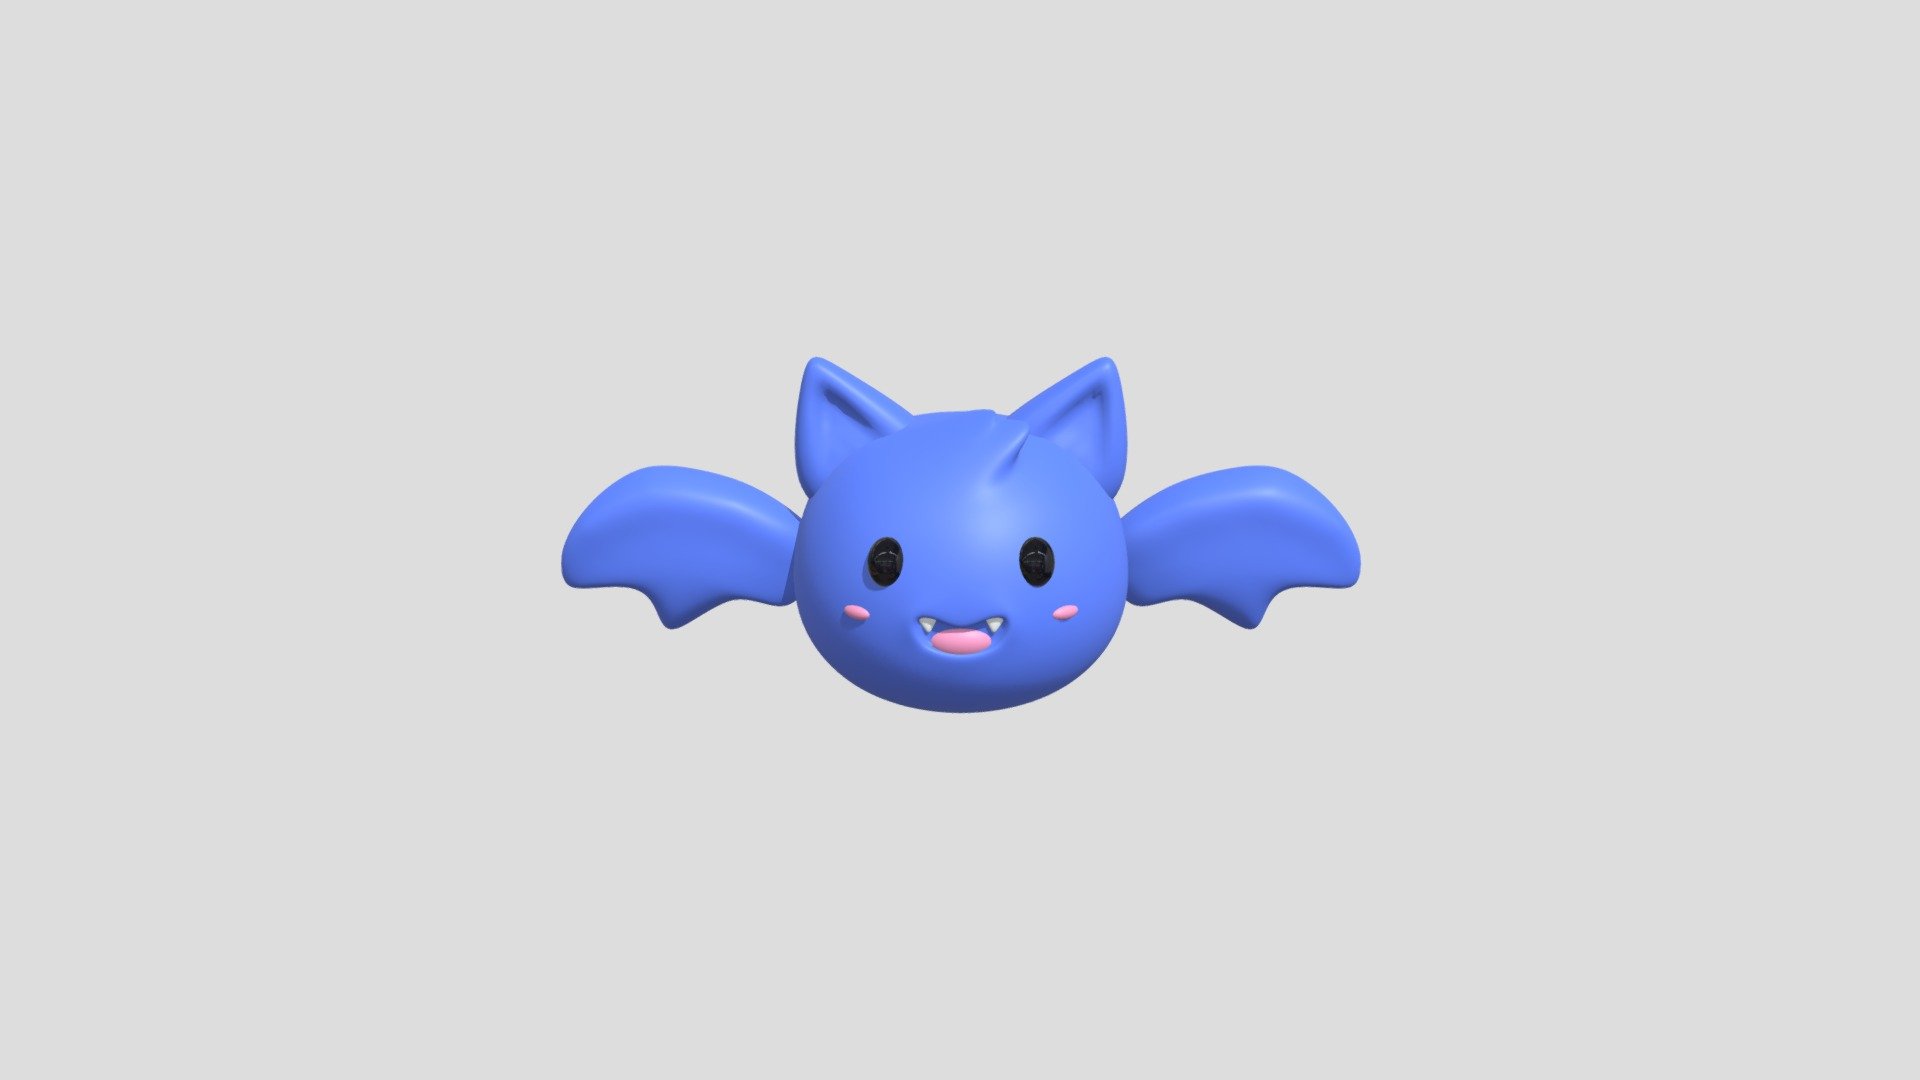 This small model corresponds to a small, cute, kawaii and adorable stylized bat.

My Portfolio: https://www.artstation.com/elvisortizb

DONATE:
https://www.paypal.com/donate/?hosted_button_id=B5YNZ9PYHCHYY

Here are some of my links to the products I've made so far:
https://sketchfab.com/ortizelvis825

Credits: Carlos Behrens3D 3d model